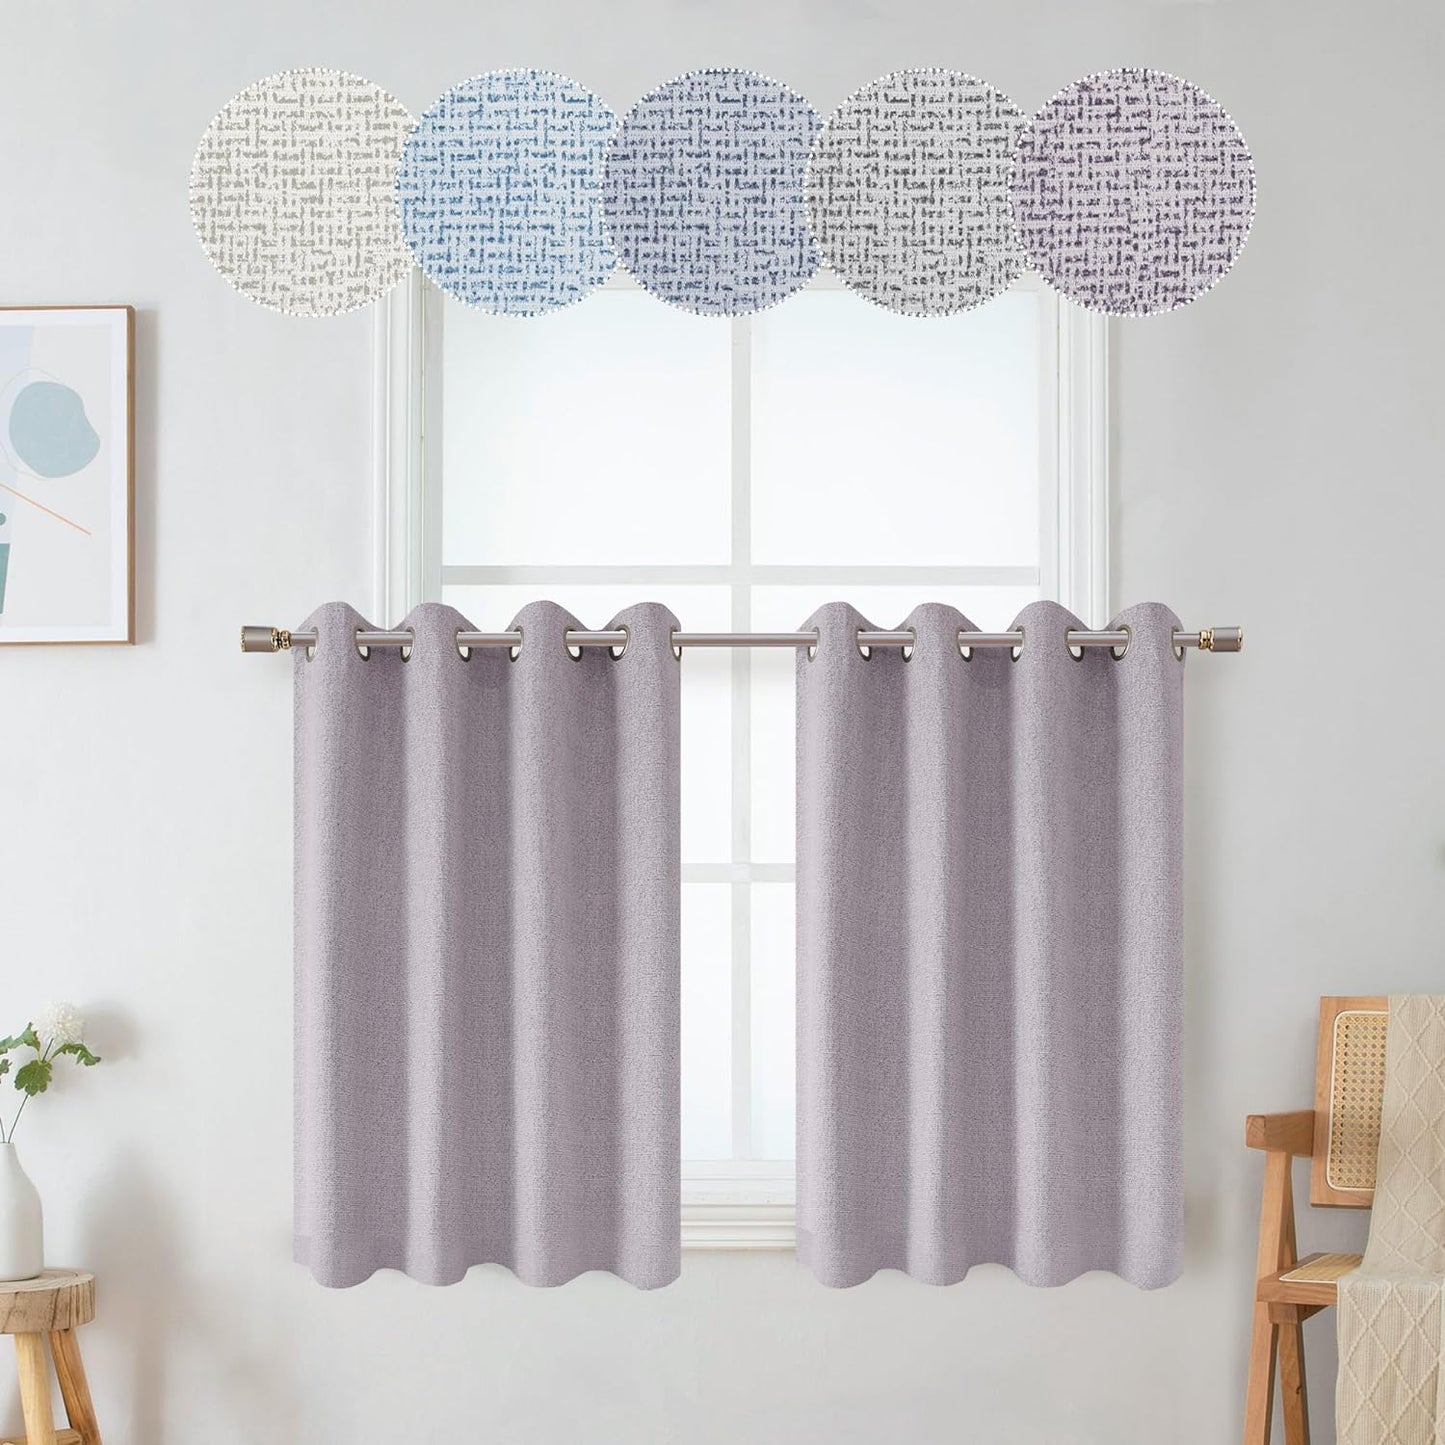 OWENIE Luke Black Out Curtains 63 Inch Long 2 Panels for Bedroom, Geometric Printed Completely Blackout Room Darkening Curtains, Grommet Thermal Insulated Living Room Curtain, 2 PCS, Each 42Wx63L Inch  OWENIE Purple 42"W X 36"L | 2 Pcs 